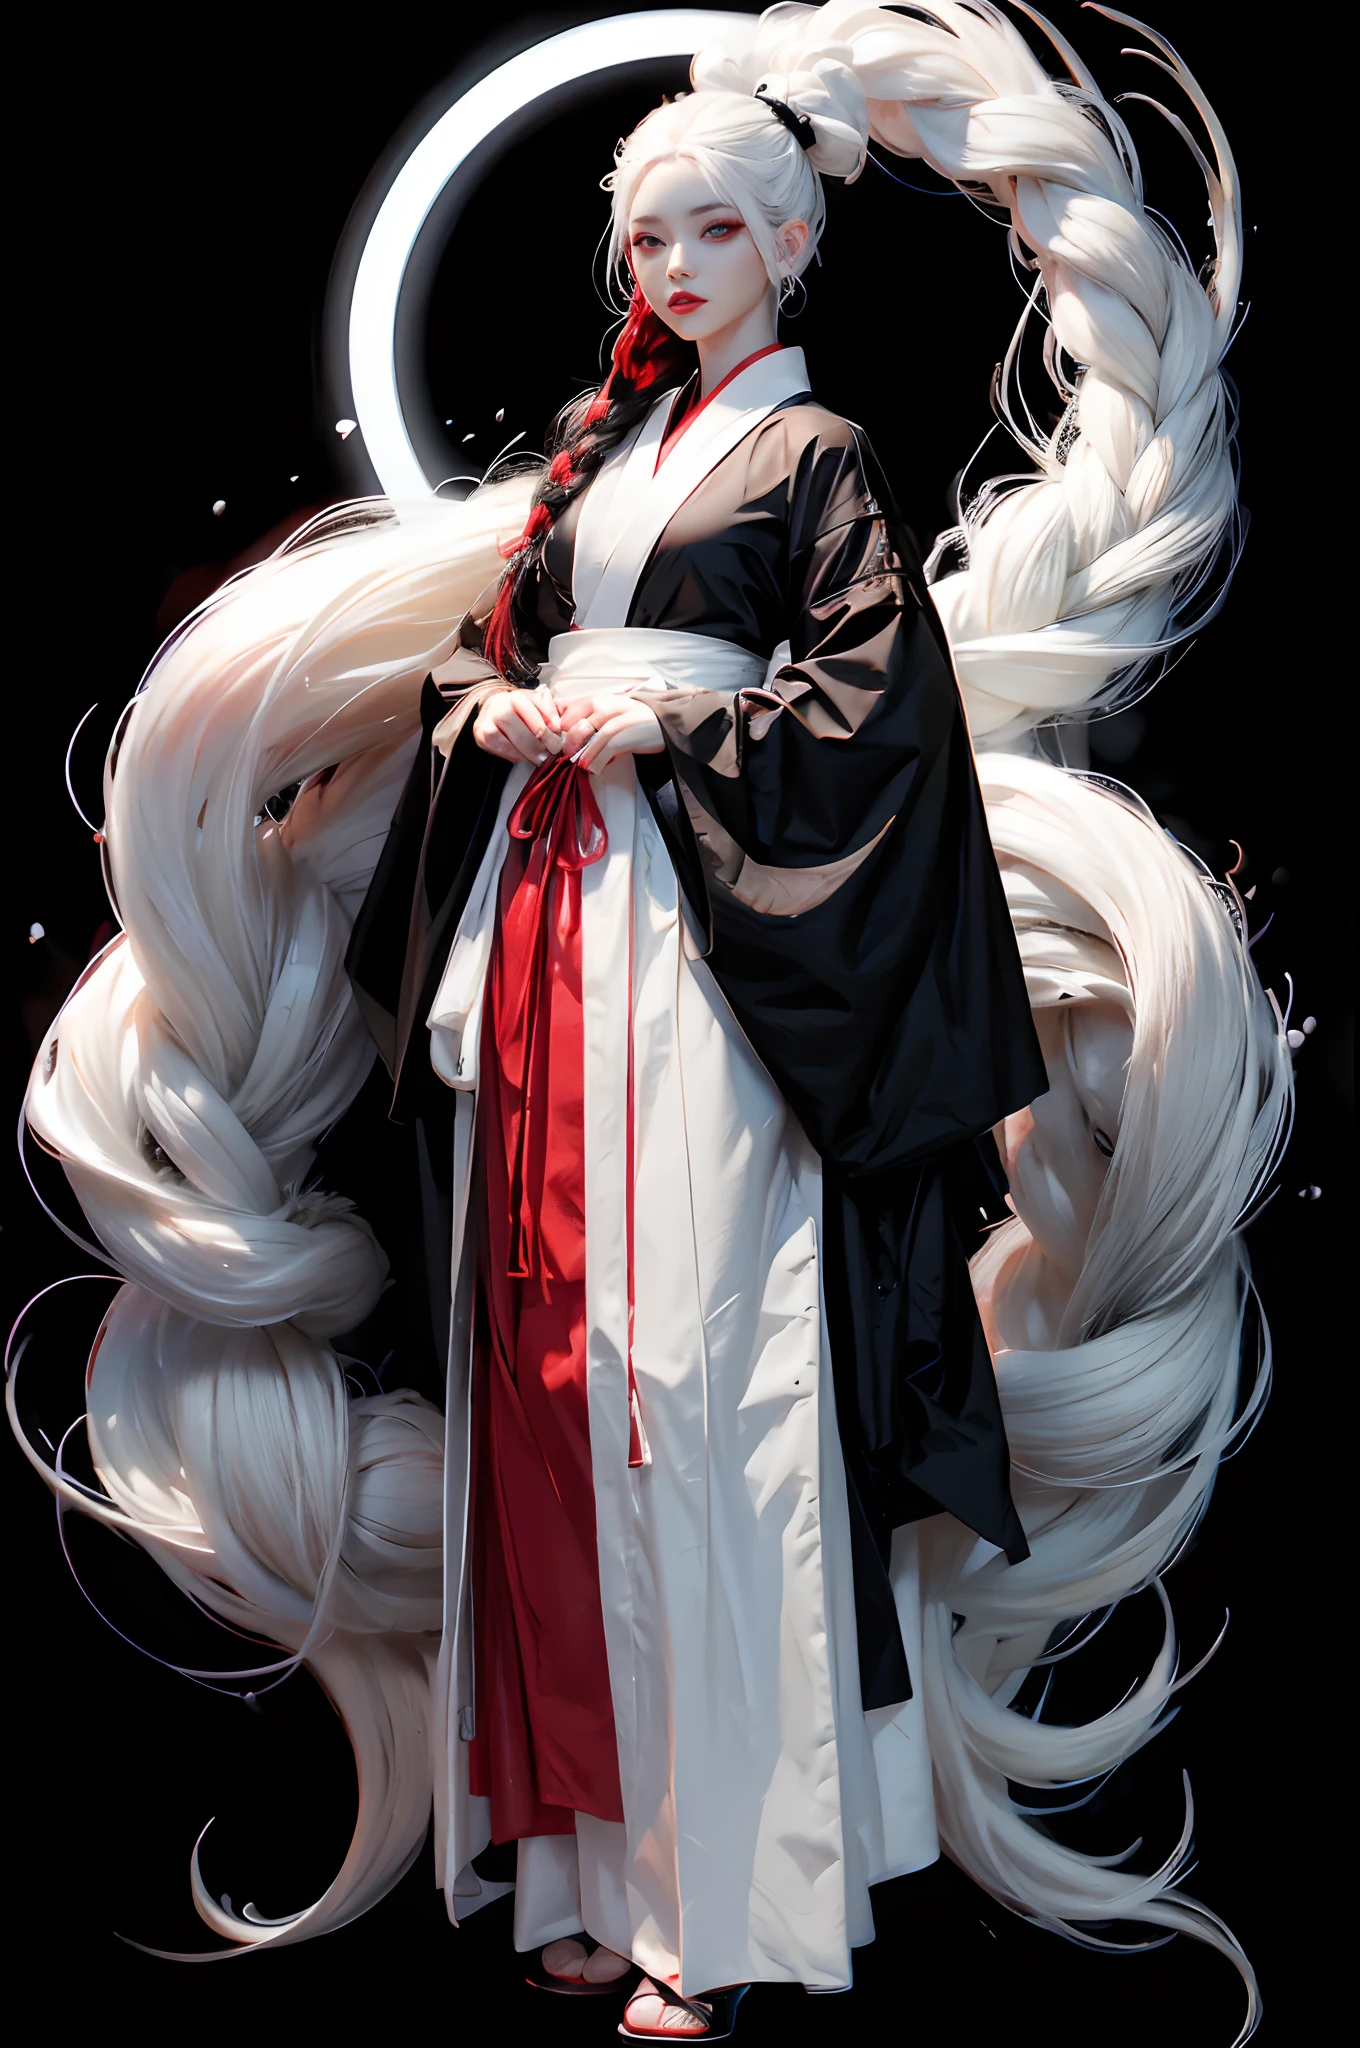 top-quality、​masterpiece、1 girl in、Black background、Black background、Full Body Angle、White and black hakama、Hakama、Standing、black backgrounds、white  hair:1.5、Red Eyes、red-lips、white  clothes、Black and white world、Black and white world、light skinned、Side braid